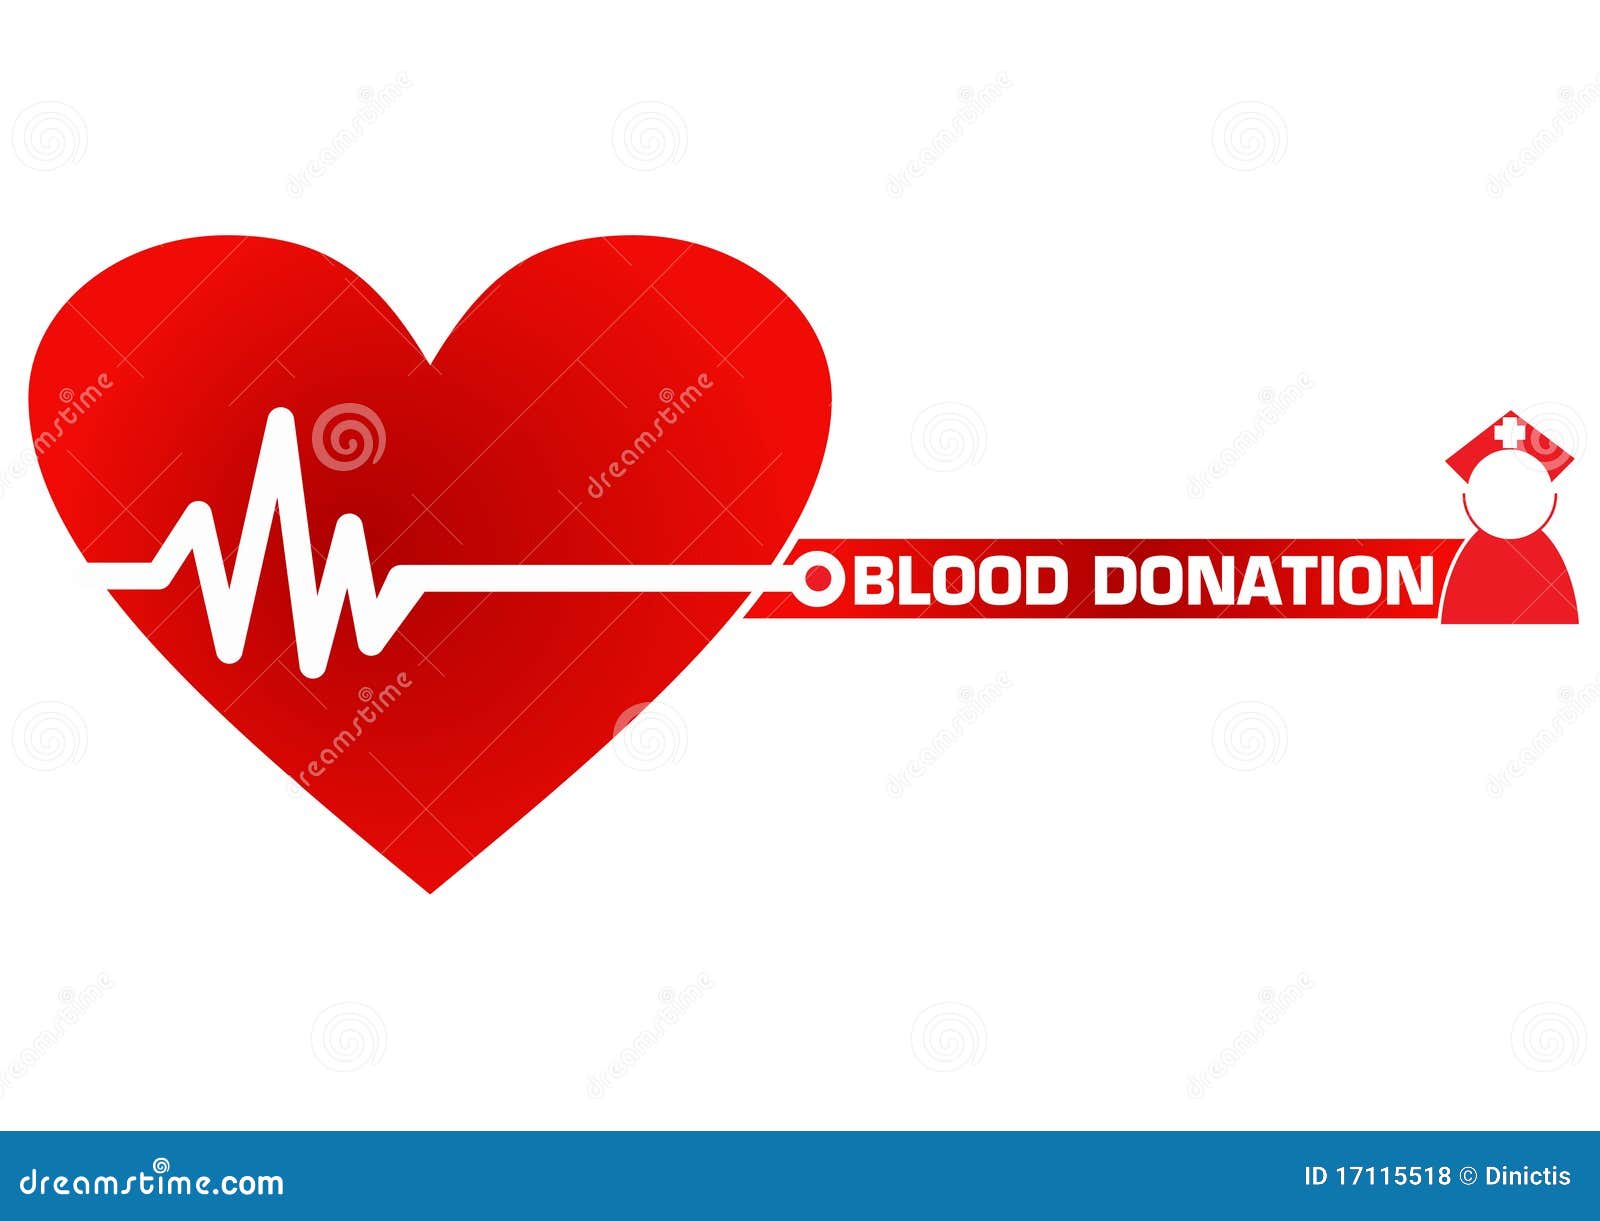 blood donation clipart - photo #37